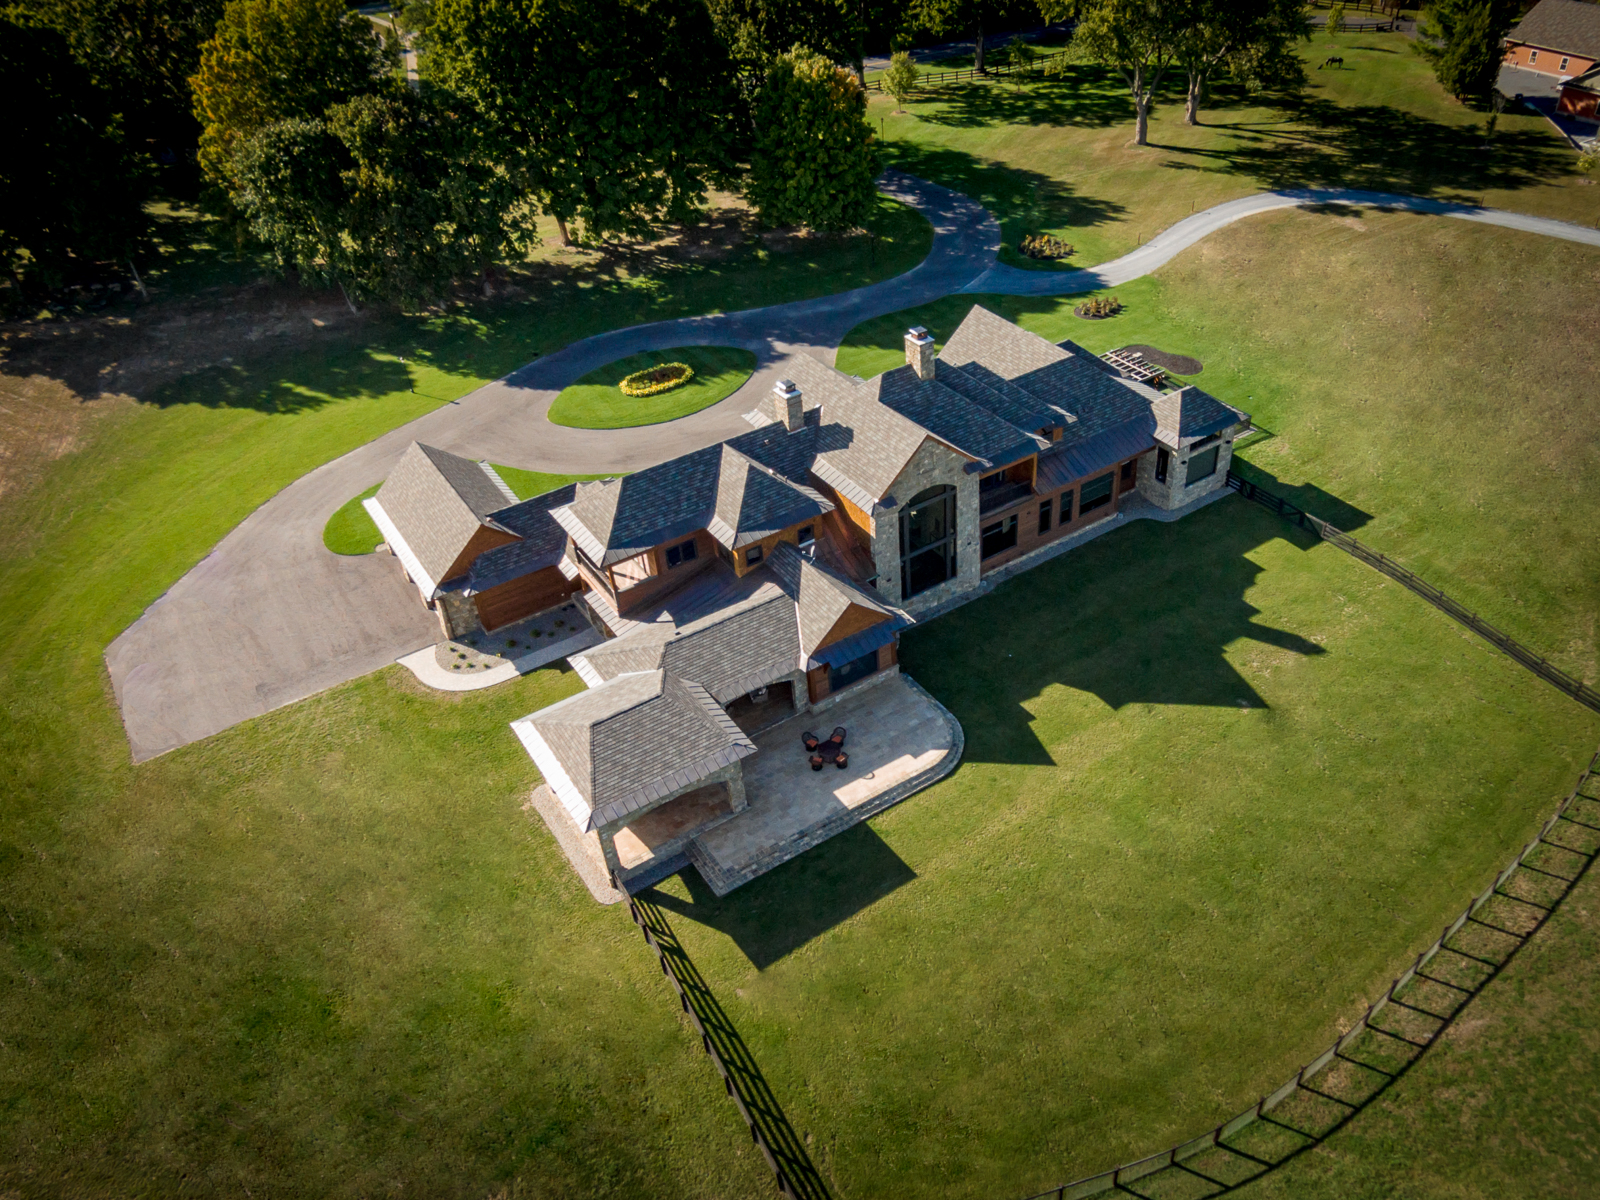  NJ Photographer | Aerial | Advertising | Editorial | Architectural | Interior | NY | CT 